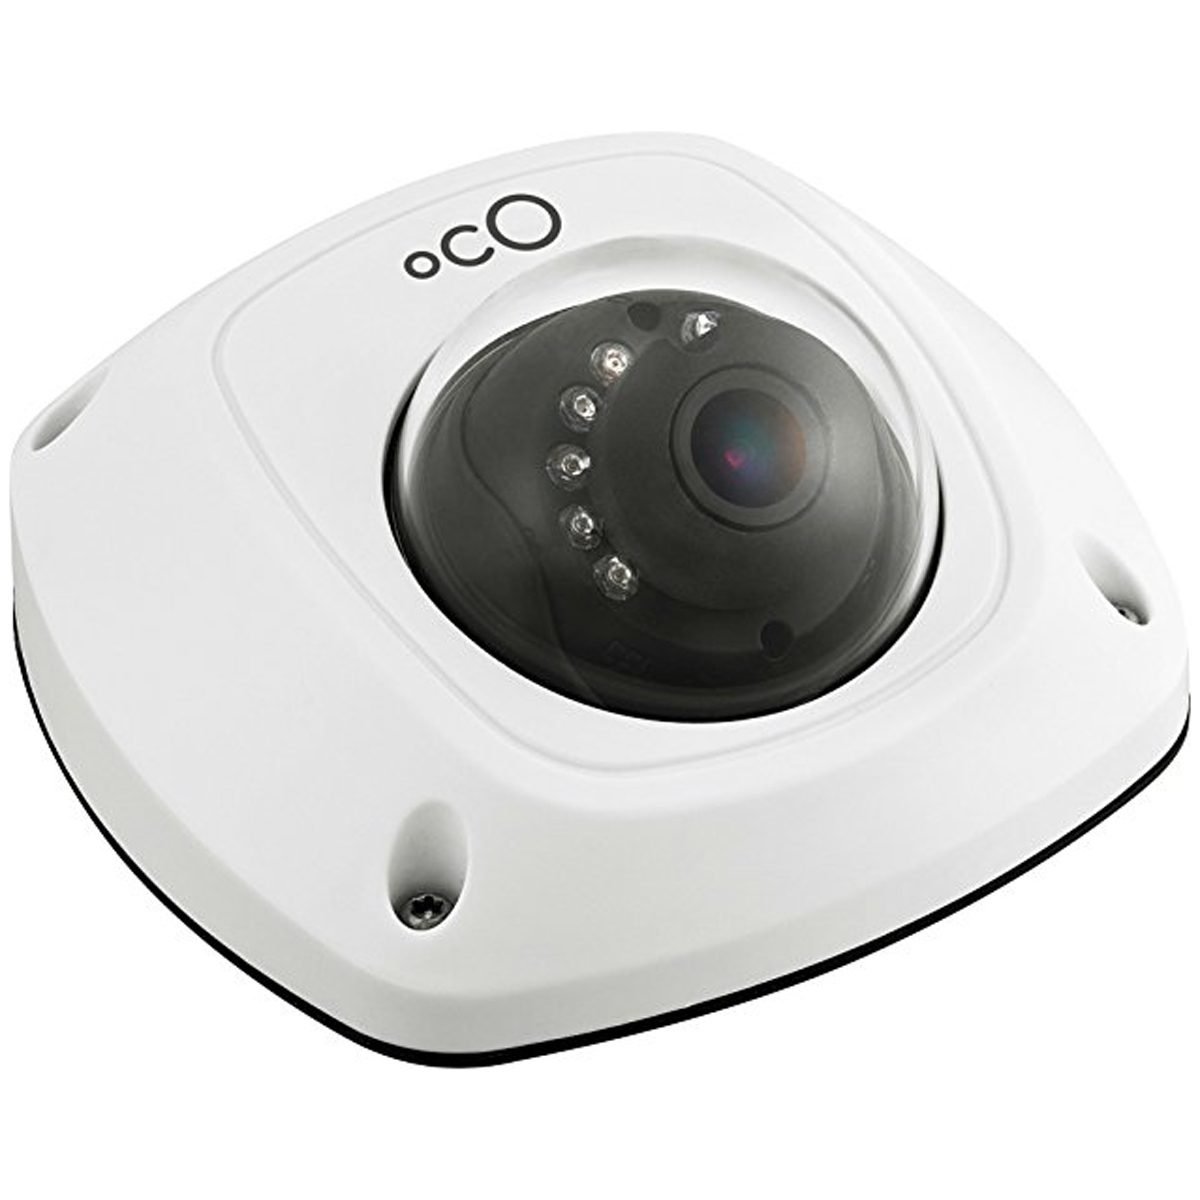 Oco Pro Dome Has Great Features